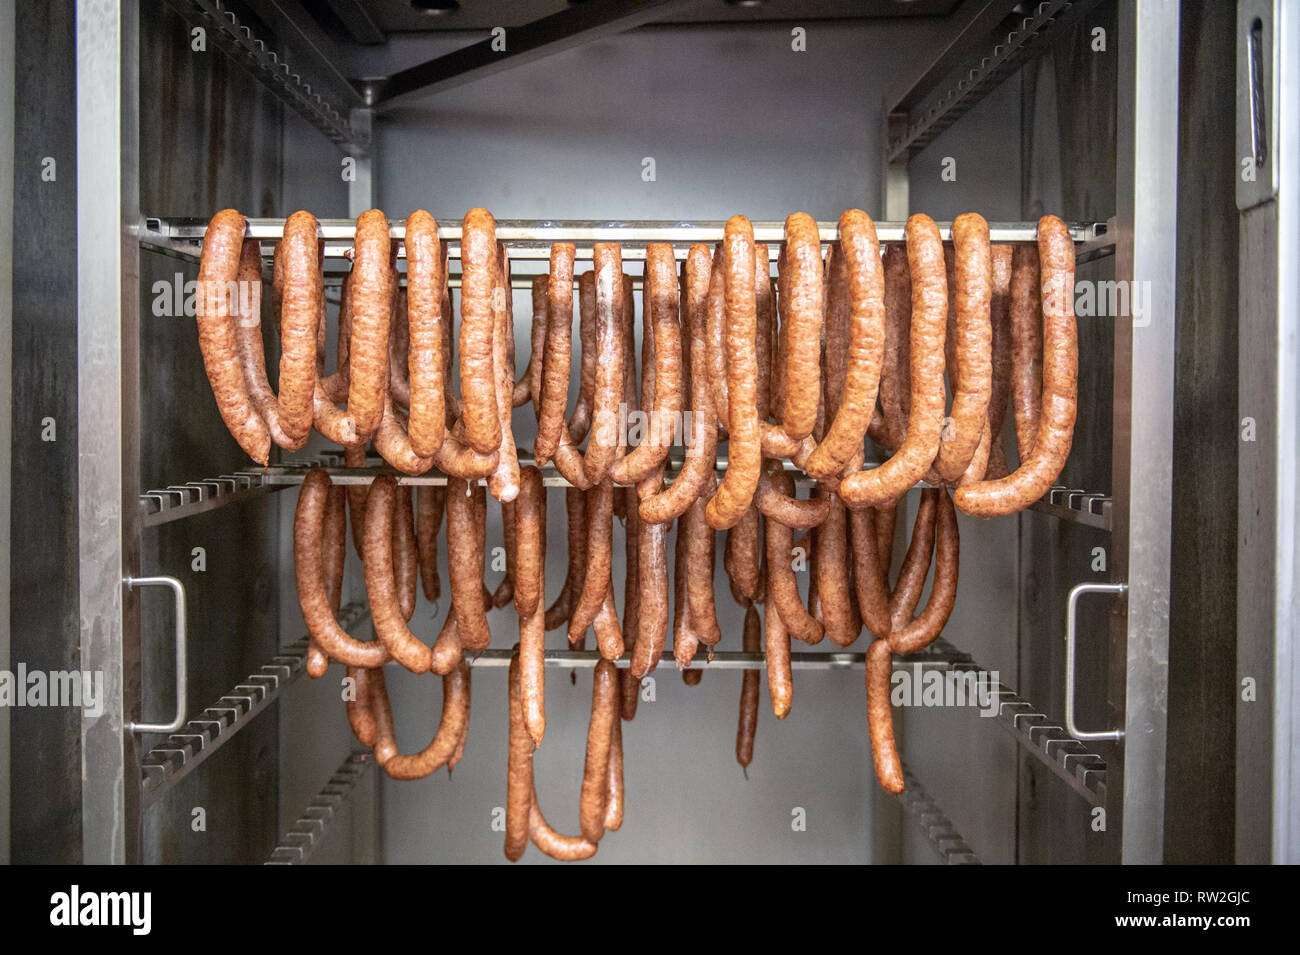 Links of cooked sausage hung over rack in proofing cabinet, Radom, Masovian Voivodeship, Poland Stock Photo